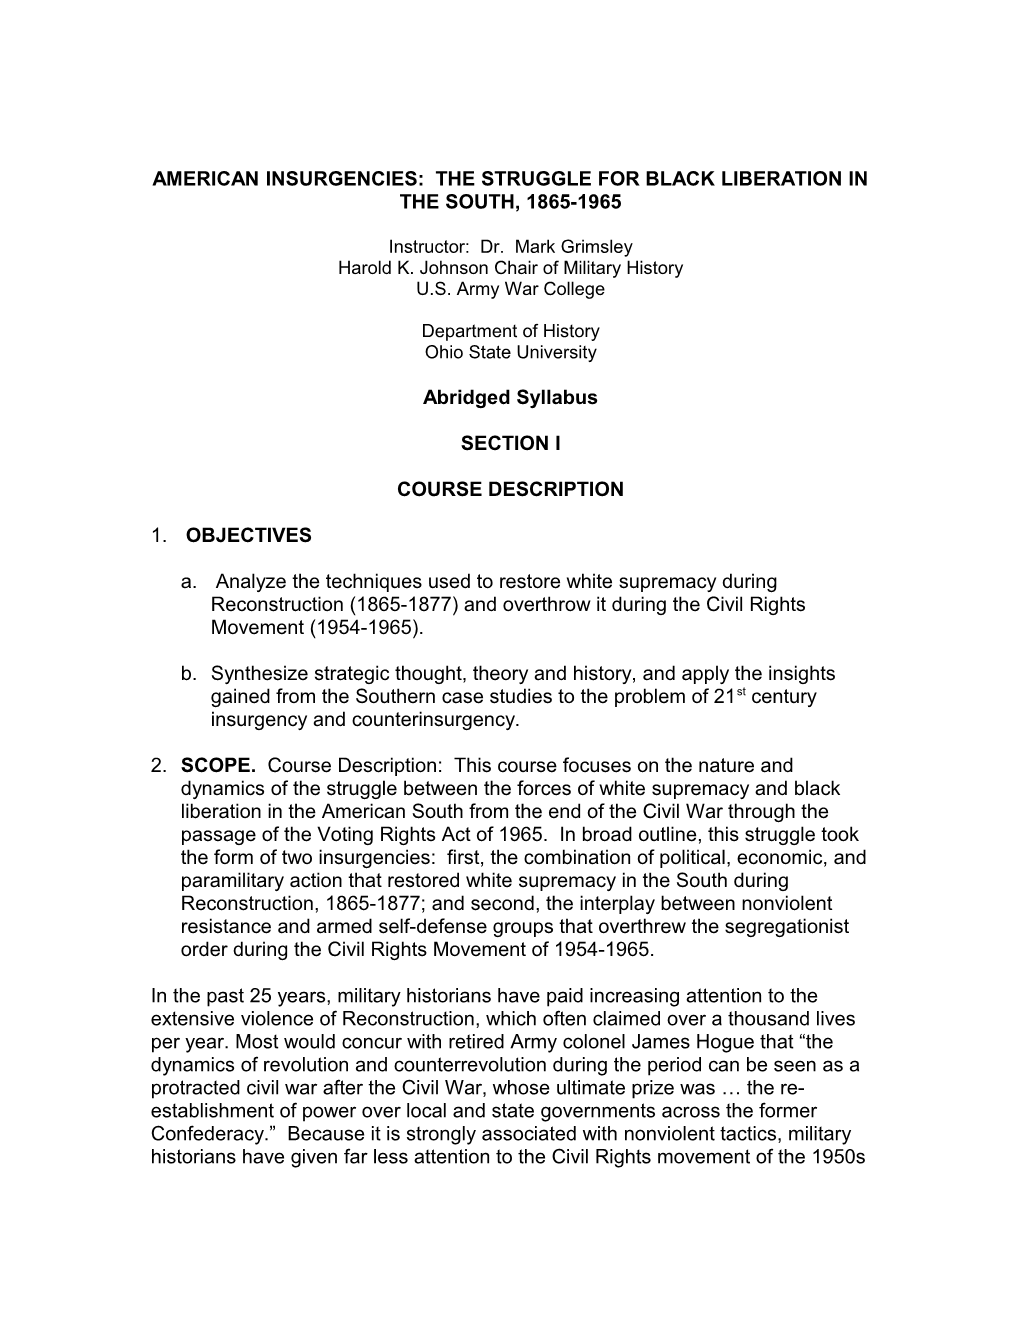 American Insurgencies: the Struggle for Black Liberation in the South, 1865-1965